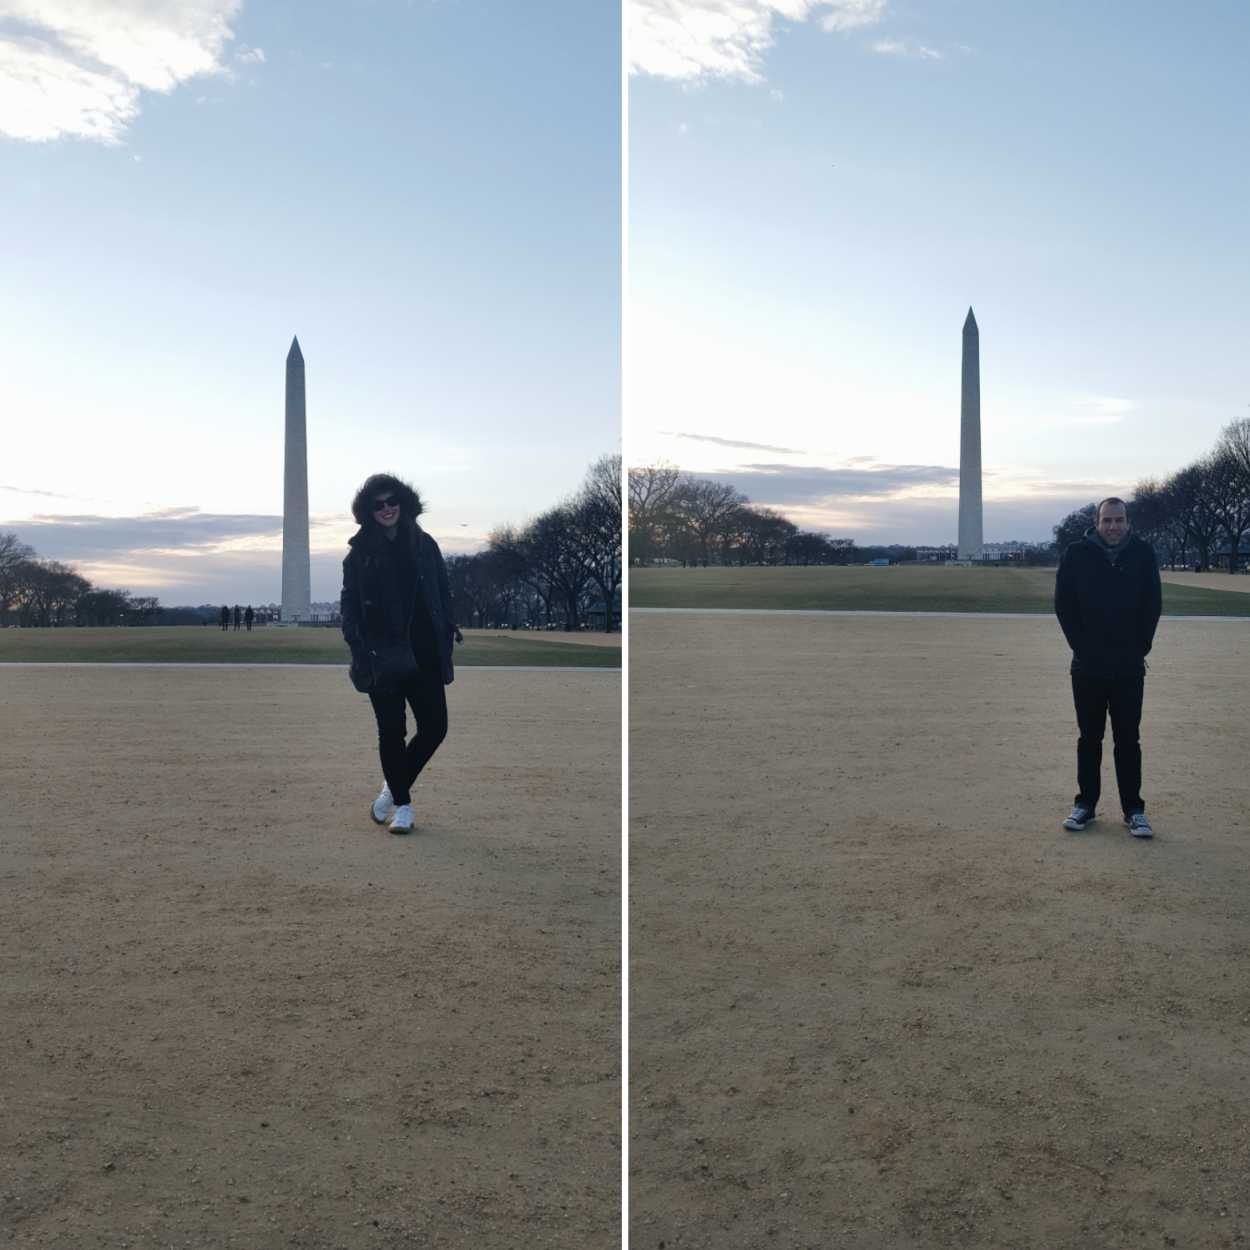 Two photos of Alyssa and Michael standing in front of the Washington Monument